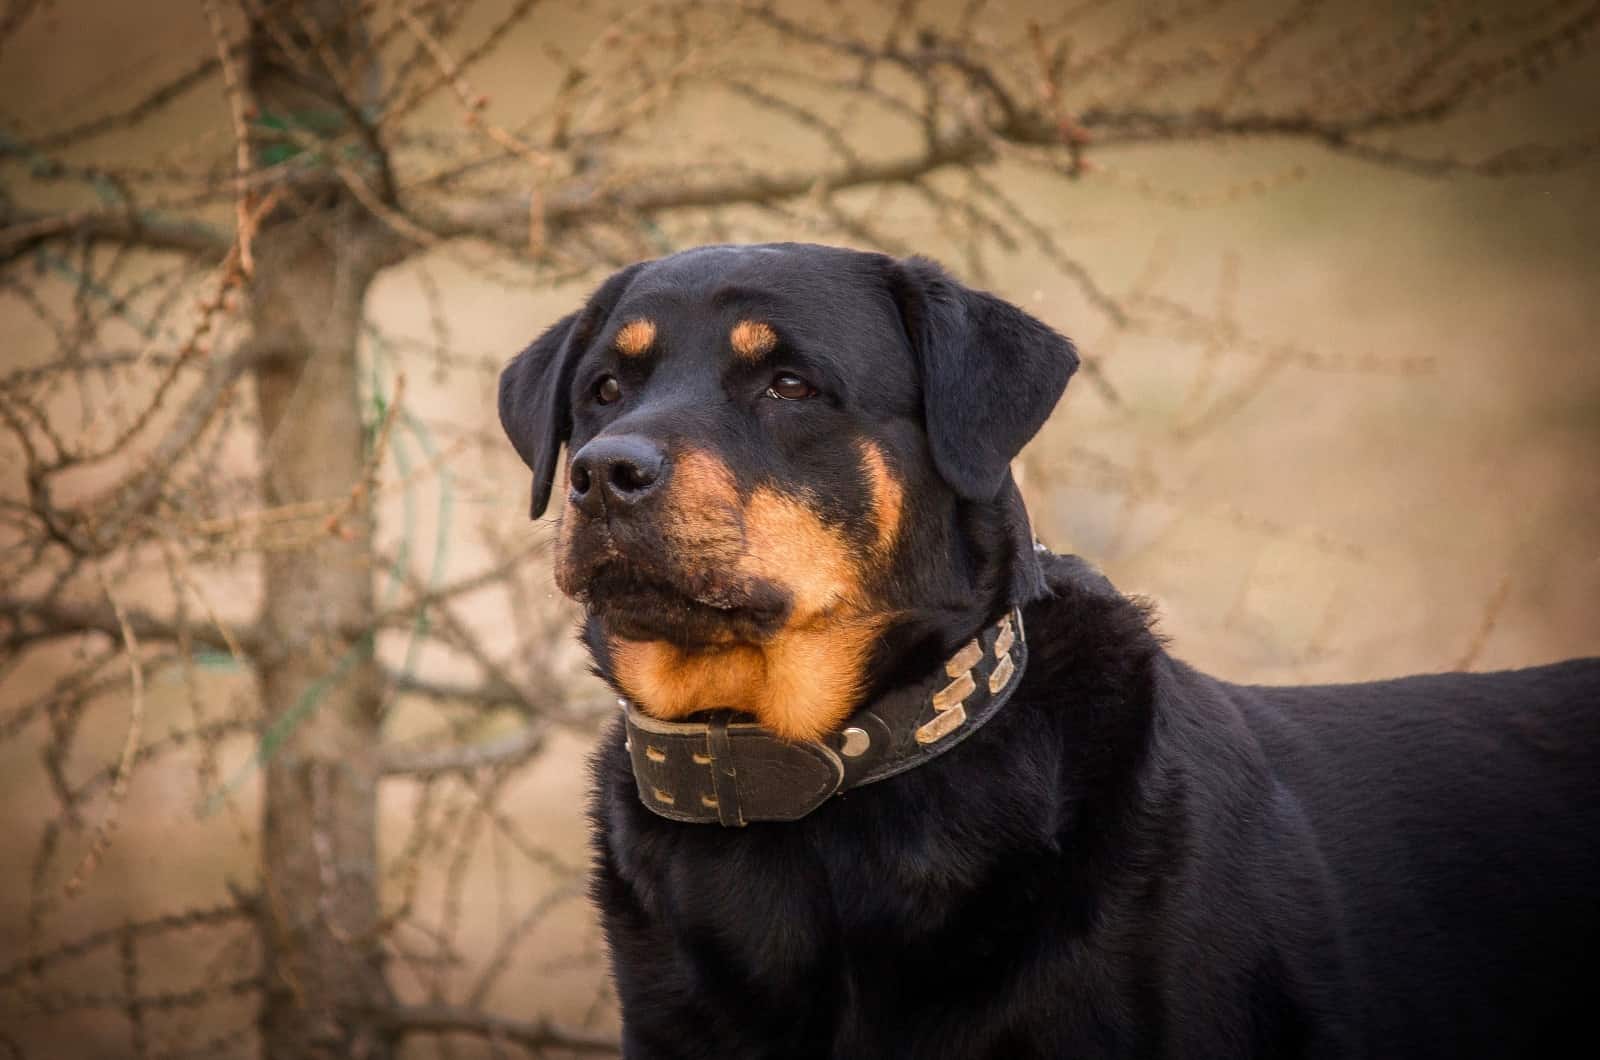 Should You Use Shock Collars On Rottweilers? Here Is The Deal…